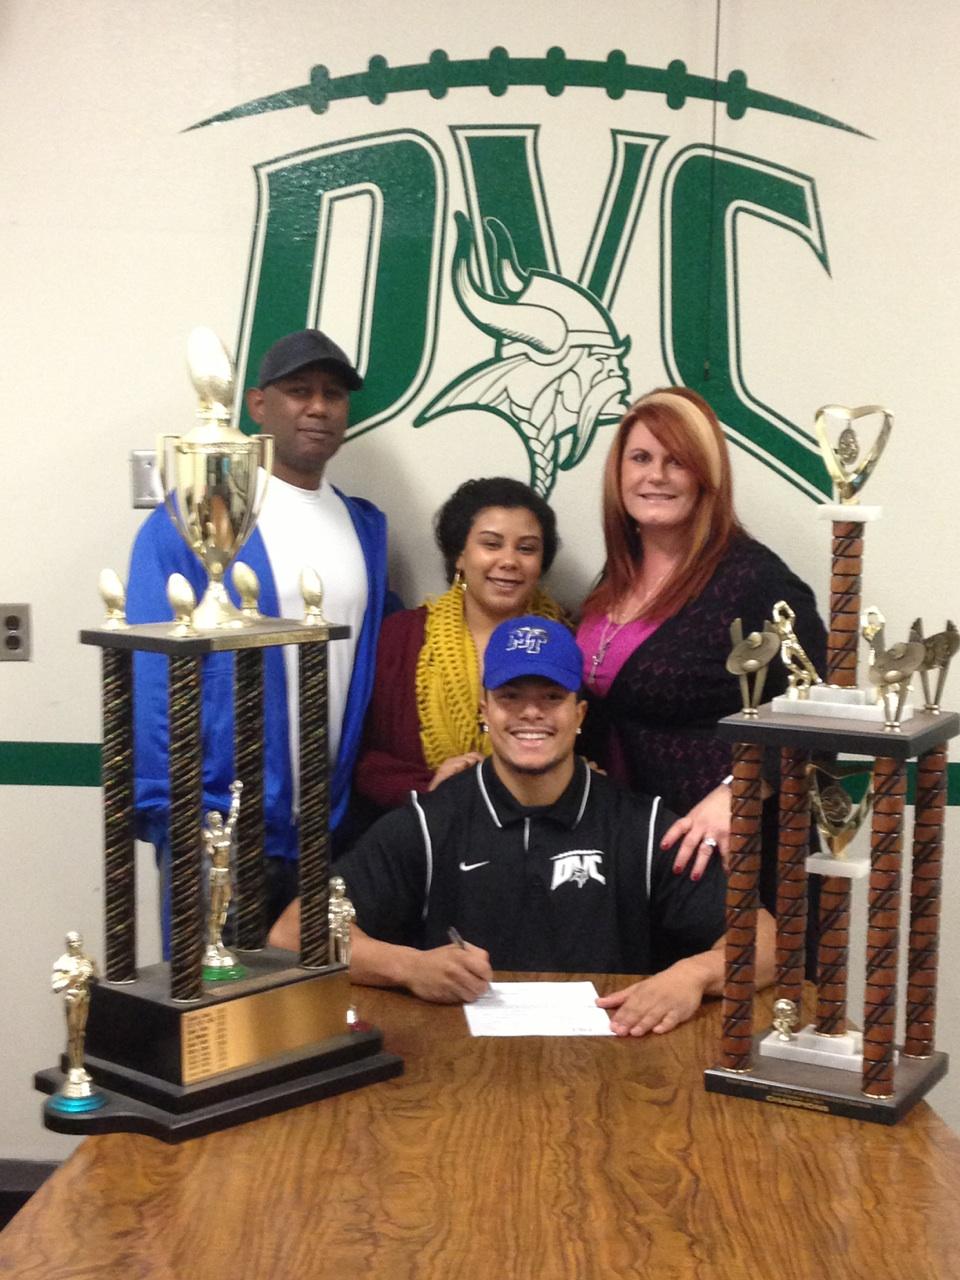 Kory Lamberts signs with Middle Tennessee State